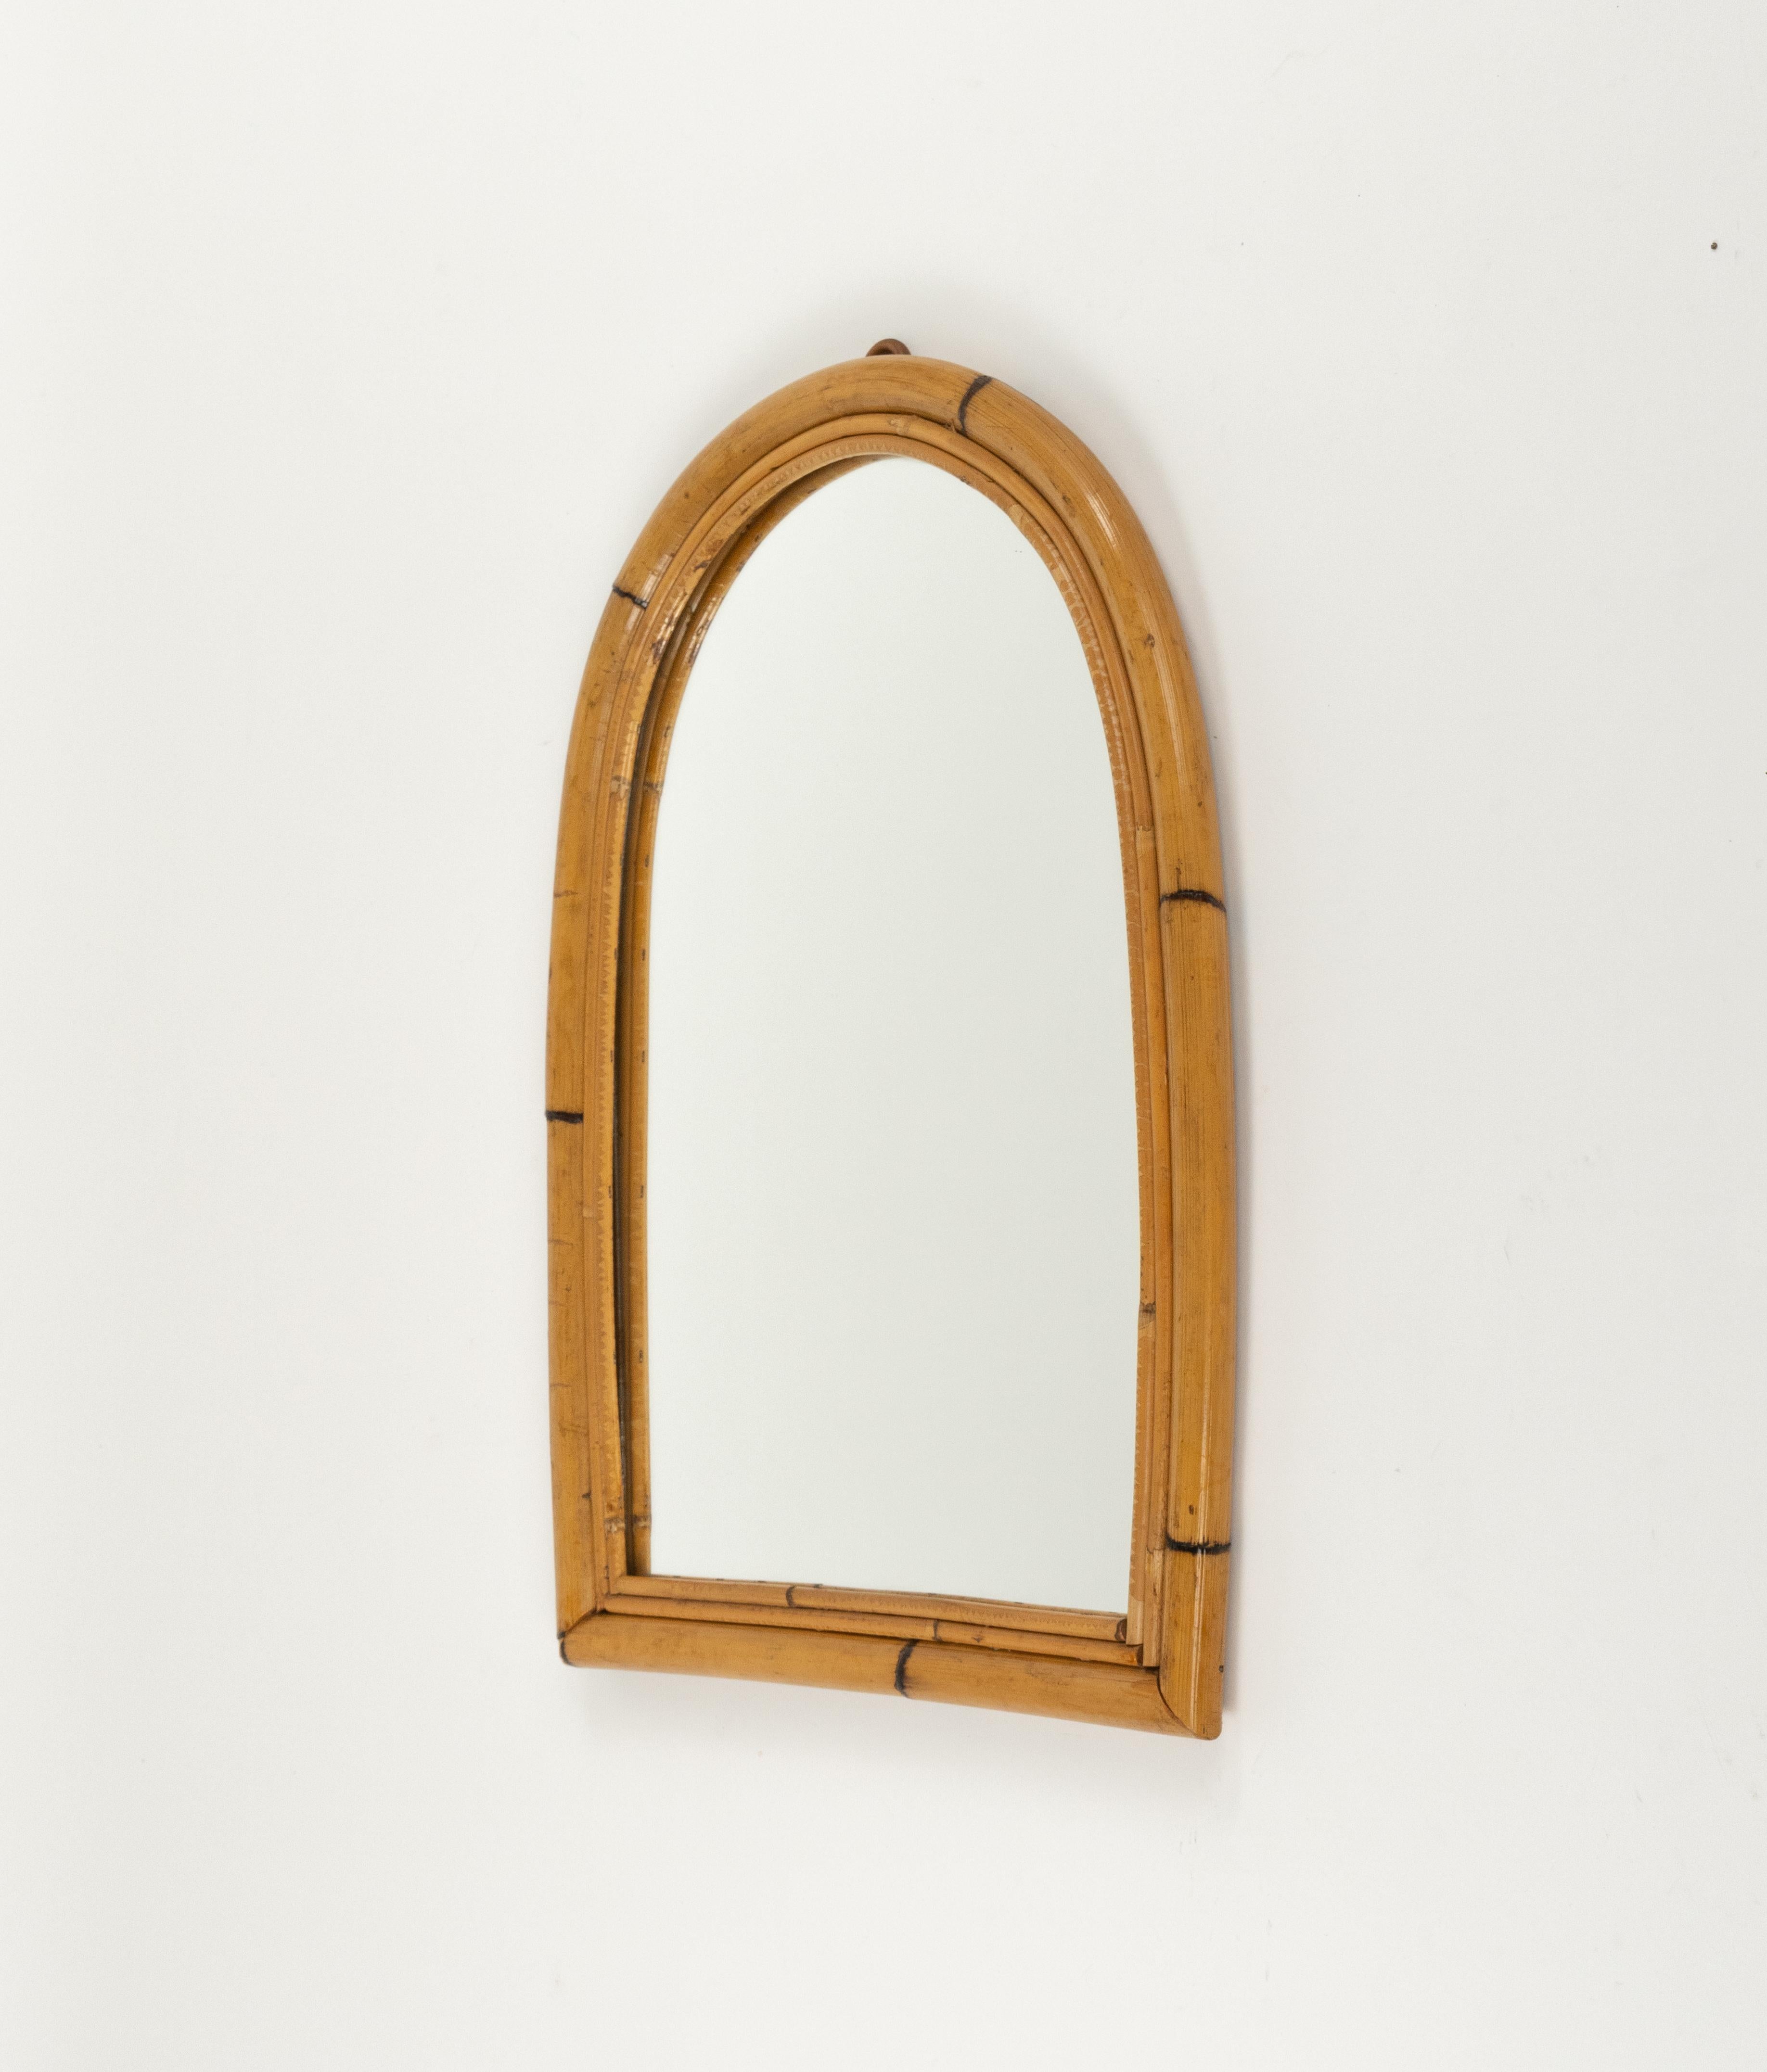 Midcentury Rattan and Bamboo Arched Wall Mirror, Italy 1960s For Sale 2